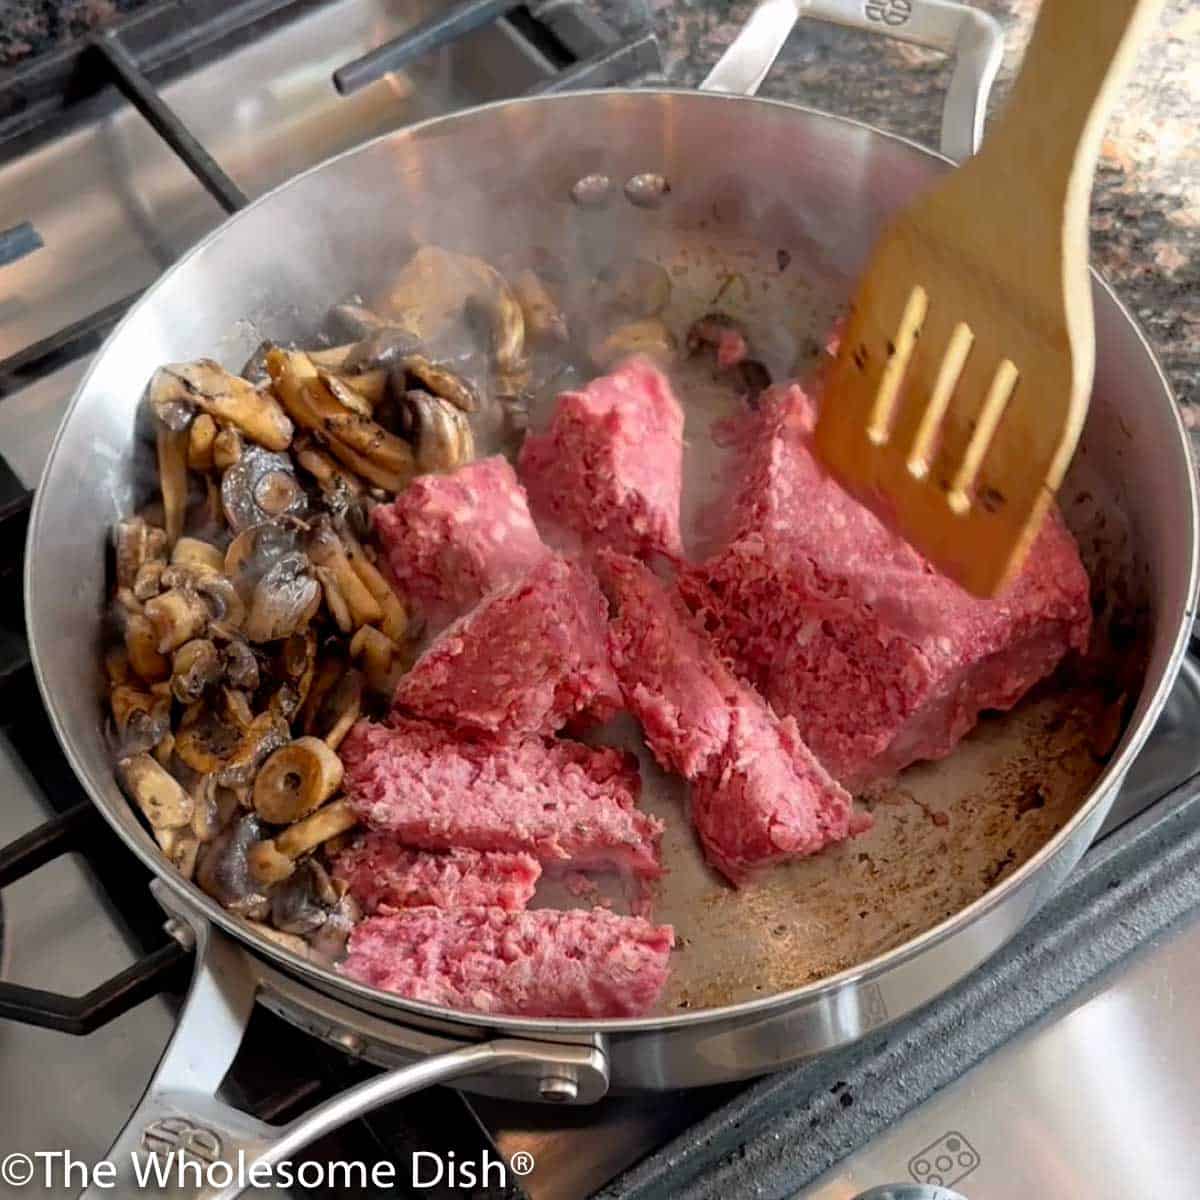 Ground beef being added to the mushrooms in the skillet.